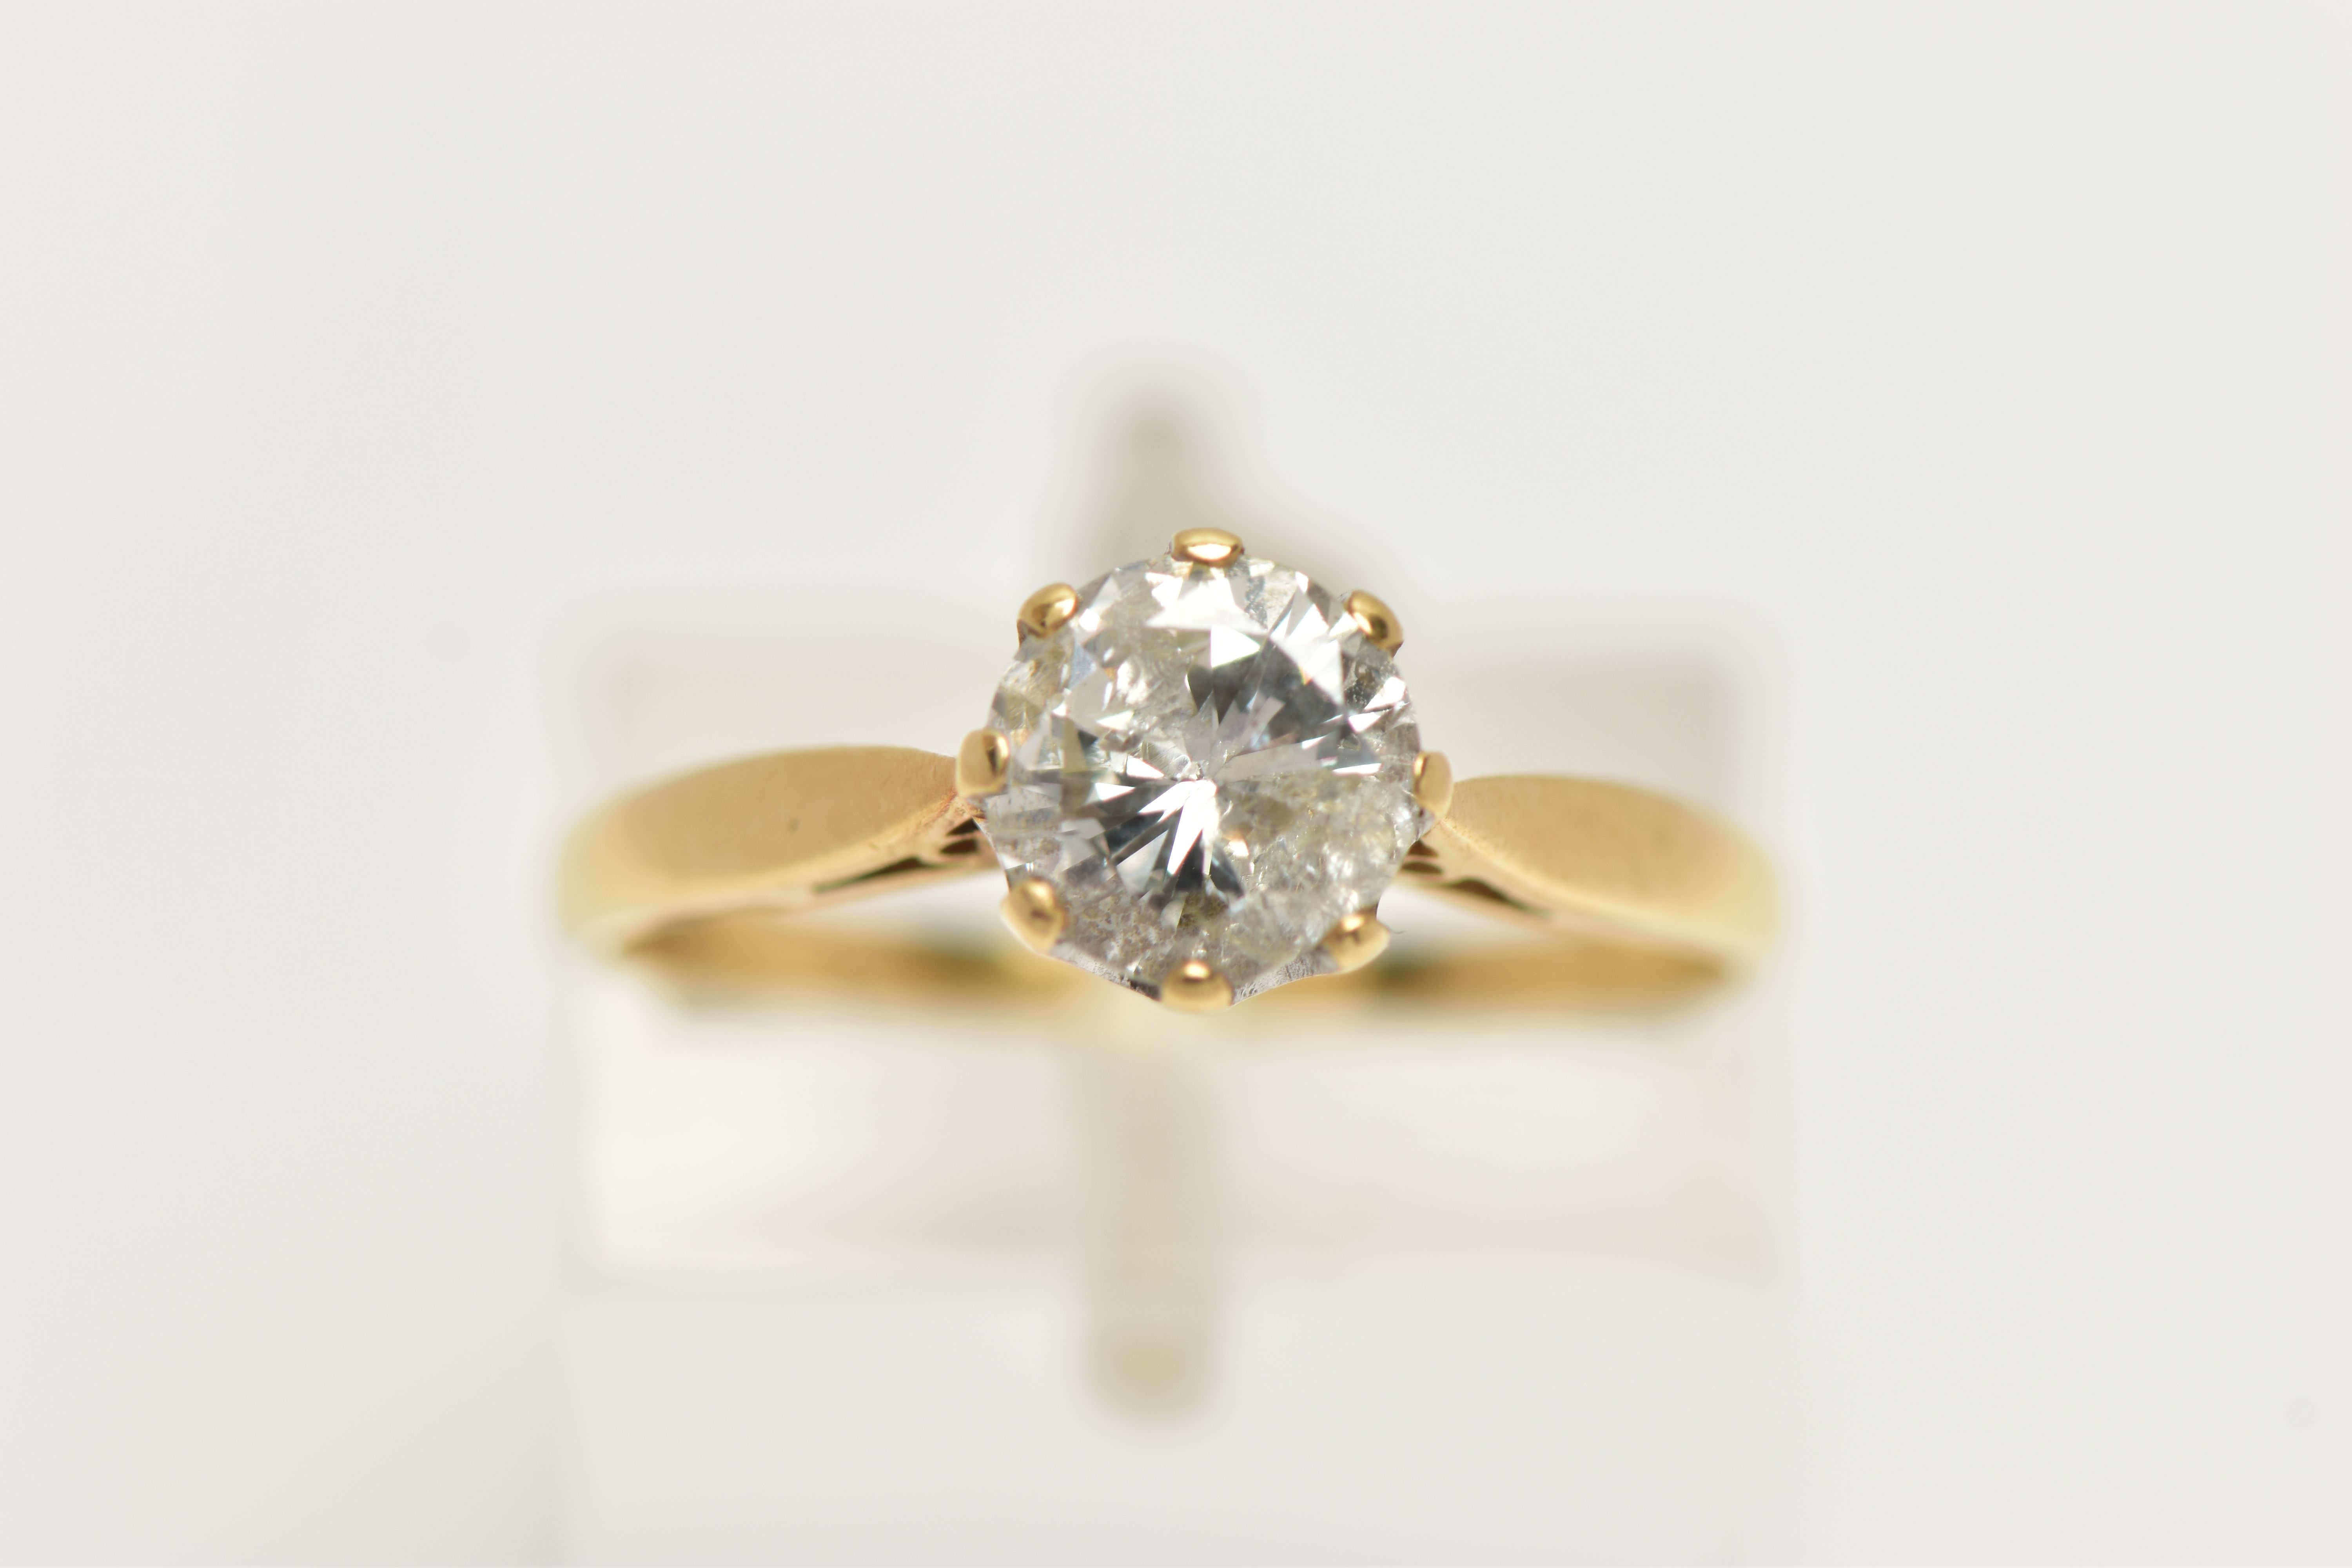 AN 18CT YELLOW GOLD, SINGLE STONE DIAMOND RING, round brilliant cut diamond in an eight claw - Image 5 of 7